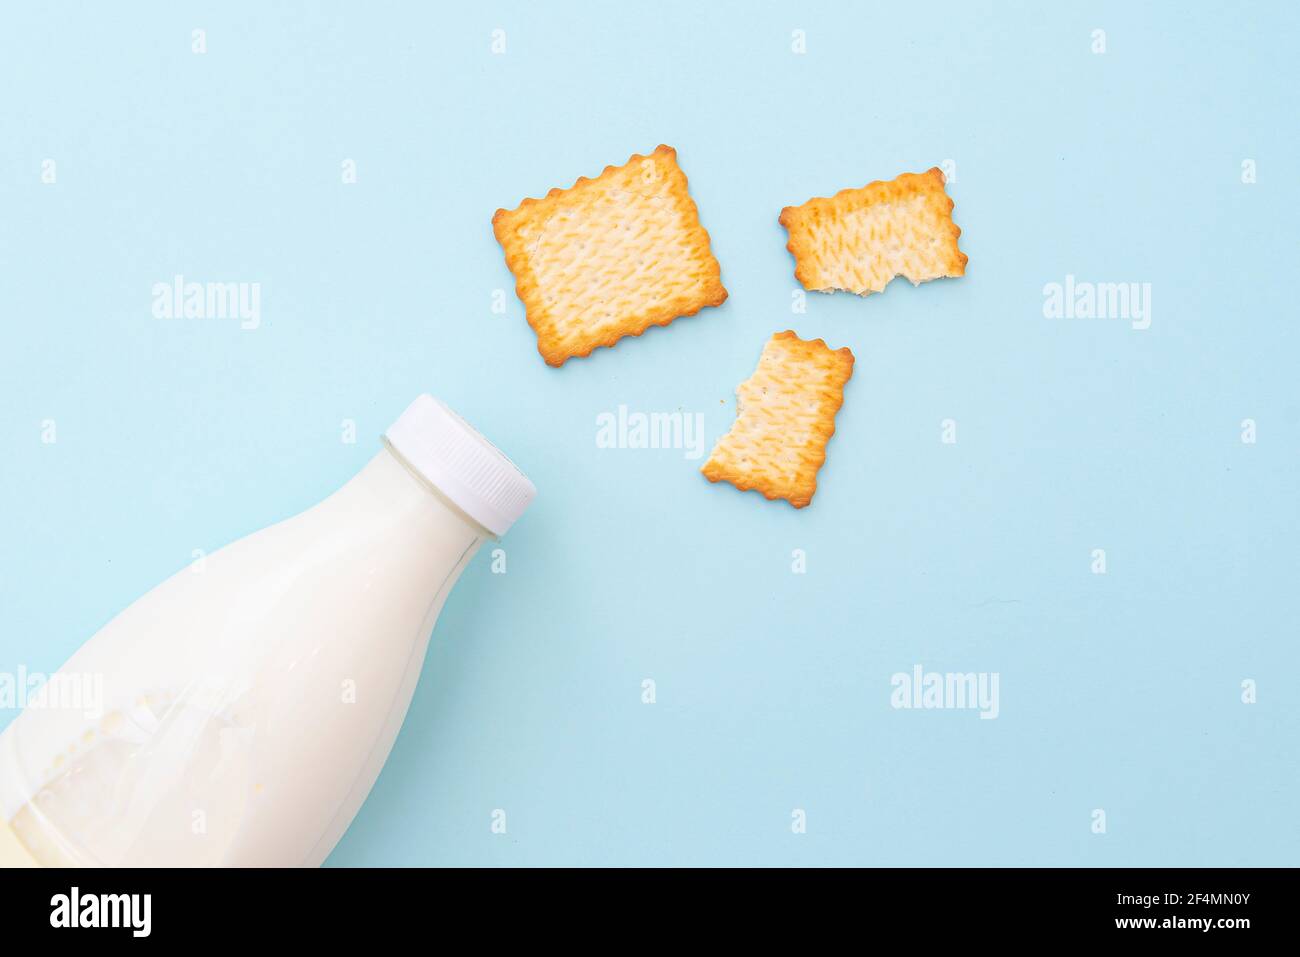 Broken dry cookies and bottle of milk on blue background, top view, lay out. Concept picture about food and breakfast Stock Photo